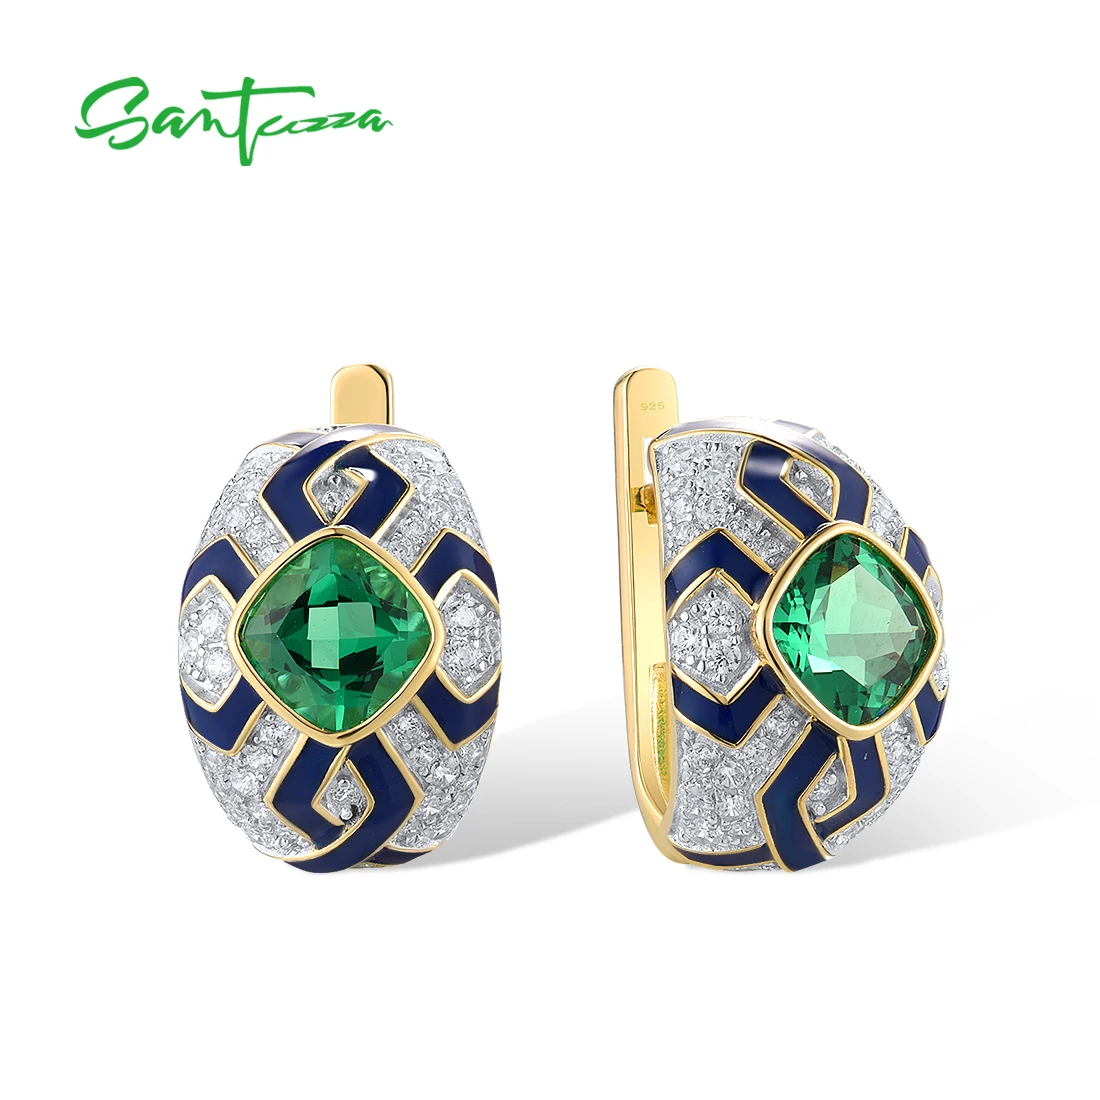 

SANTUZZA Authentic 925 Sterling Silver Earrings For Woman Sparkling Green Spinel Enamel Grand Solitaire Party Gifts Fine Jewelry